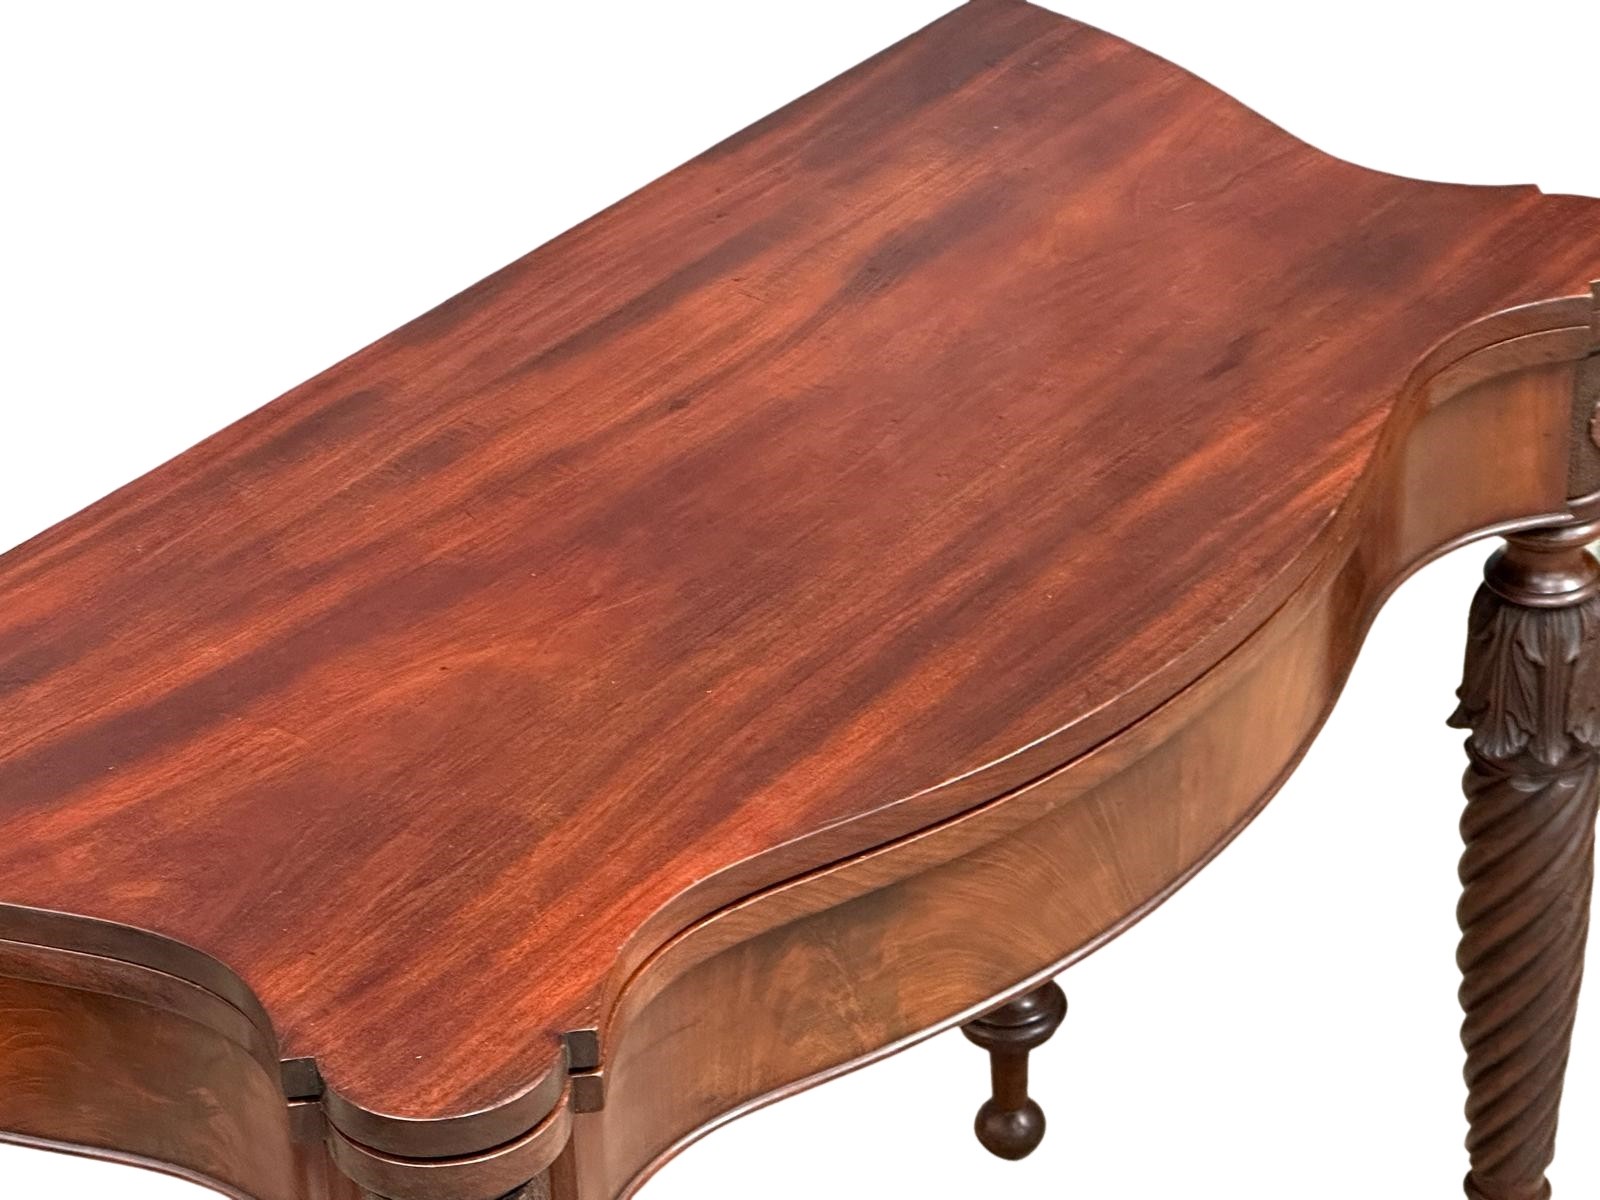 A William IV mahogany serpentine front turnover tea table on turned legs. Circa 1830. 87x44x75cm - Image 5 of 9